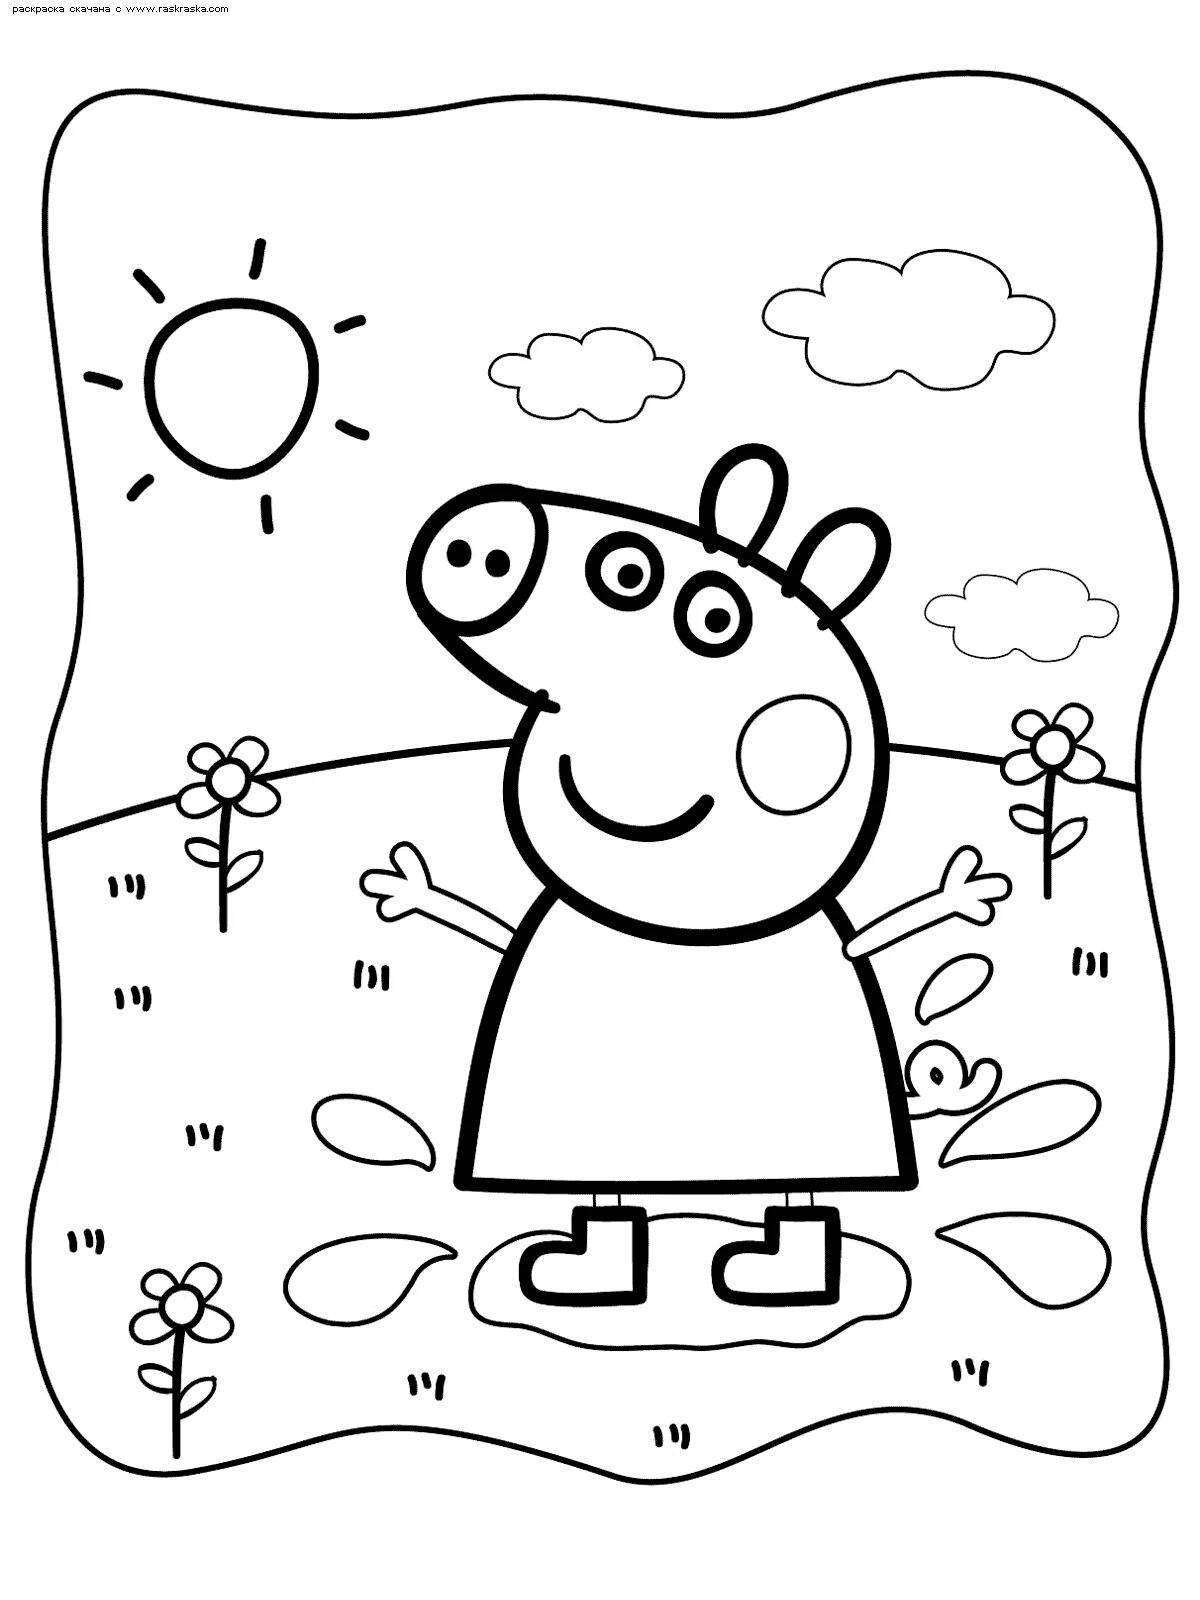 Incredible peppa pig coloring book for kids 5-6 years old